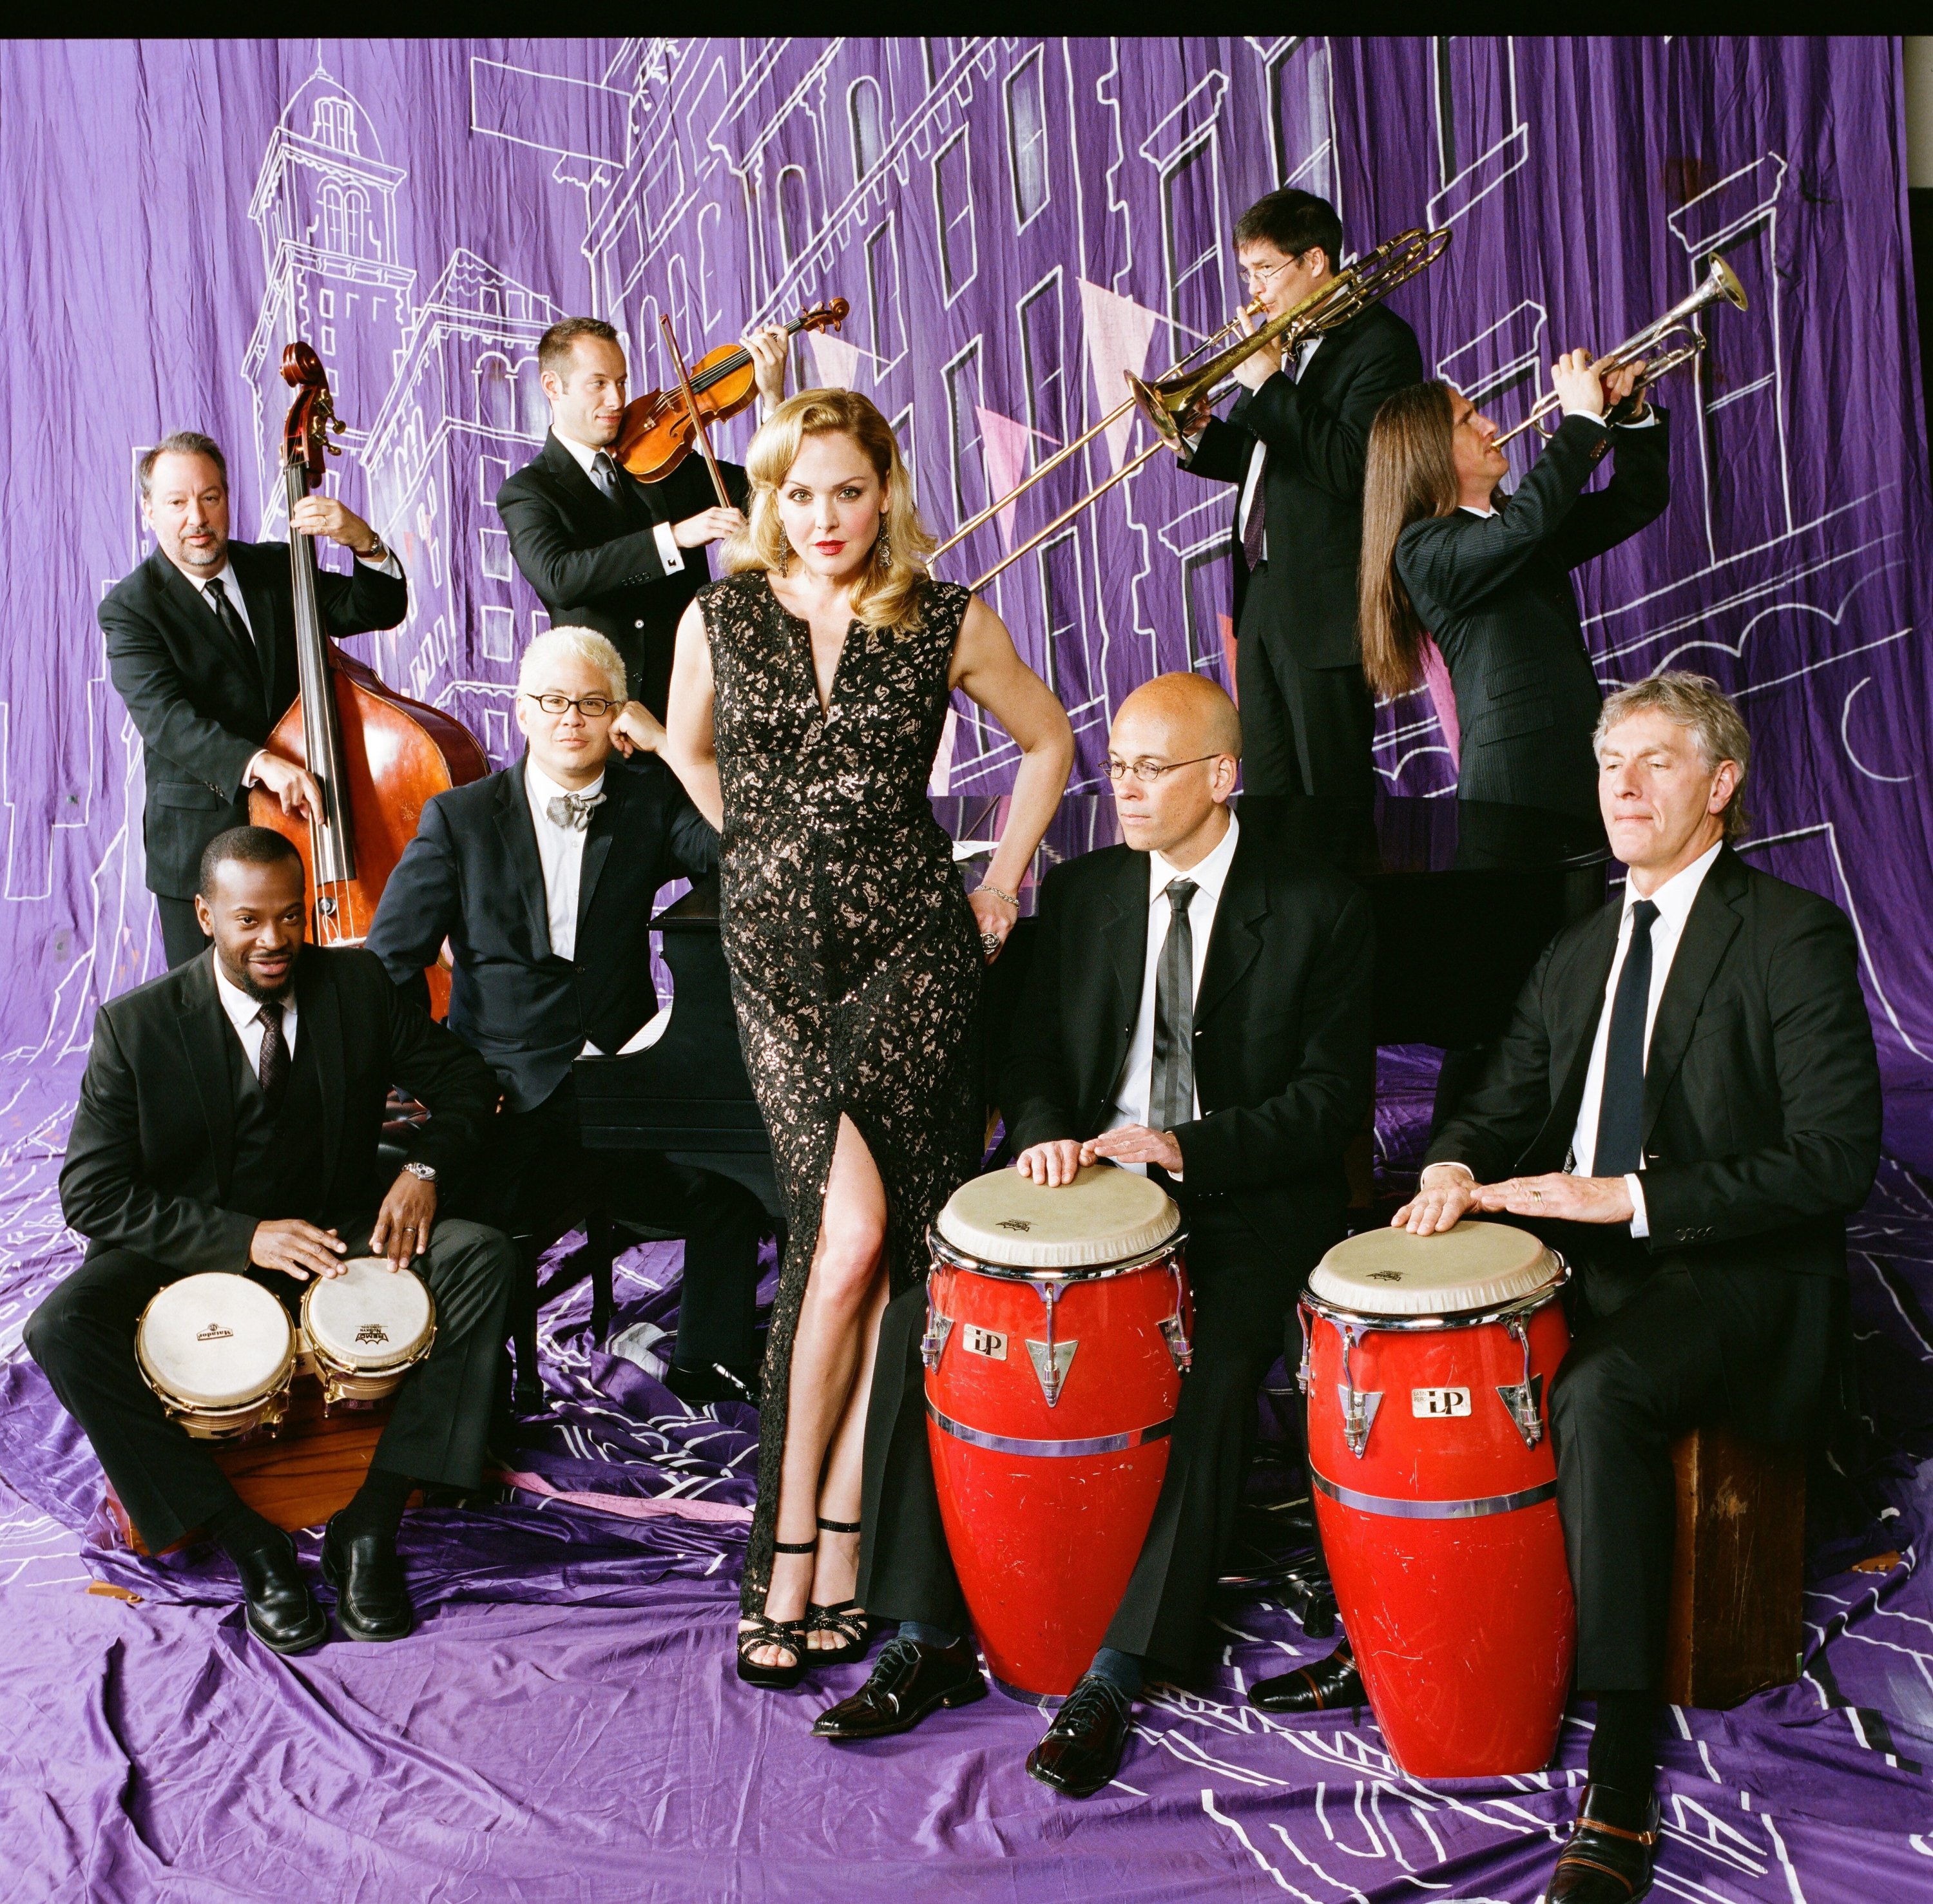 Pink Martini to sweep Istanbul stage as part of Europe tour Daily Sabah